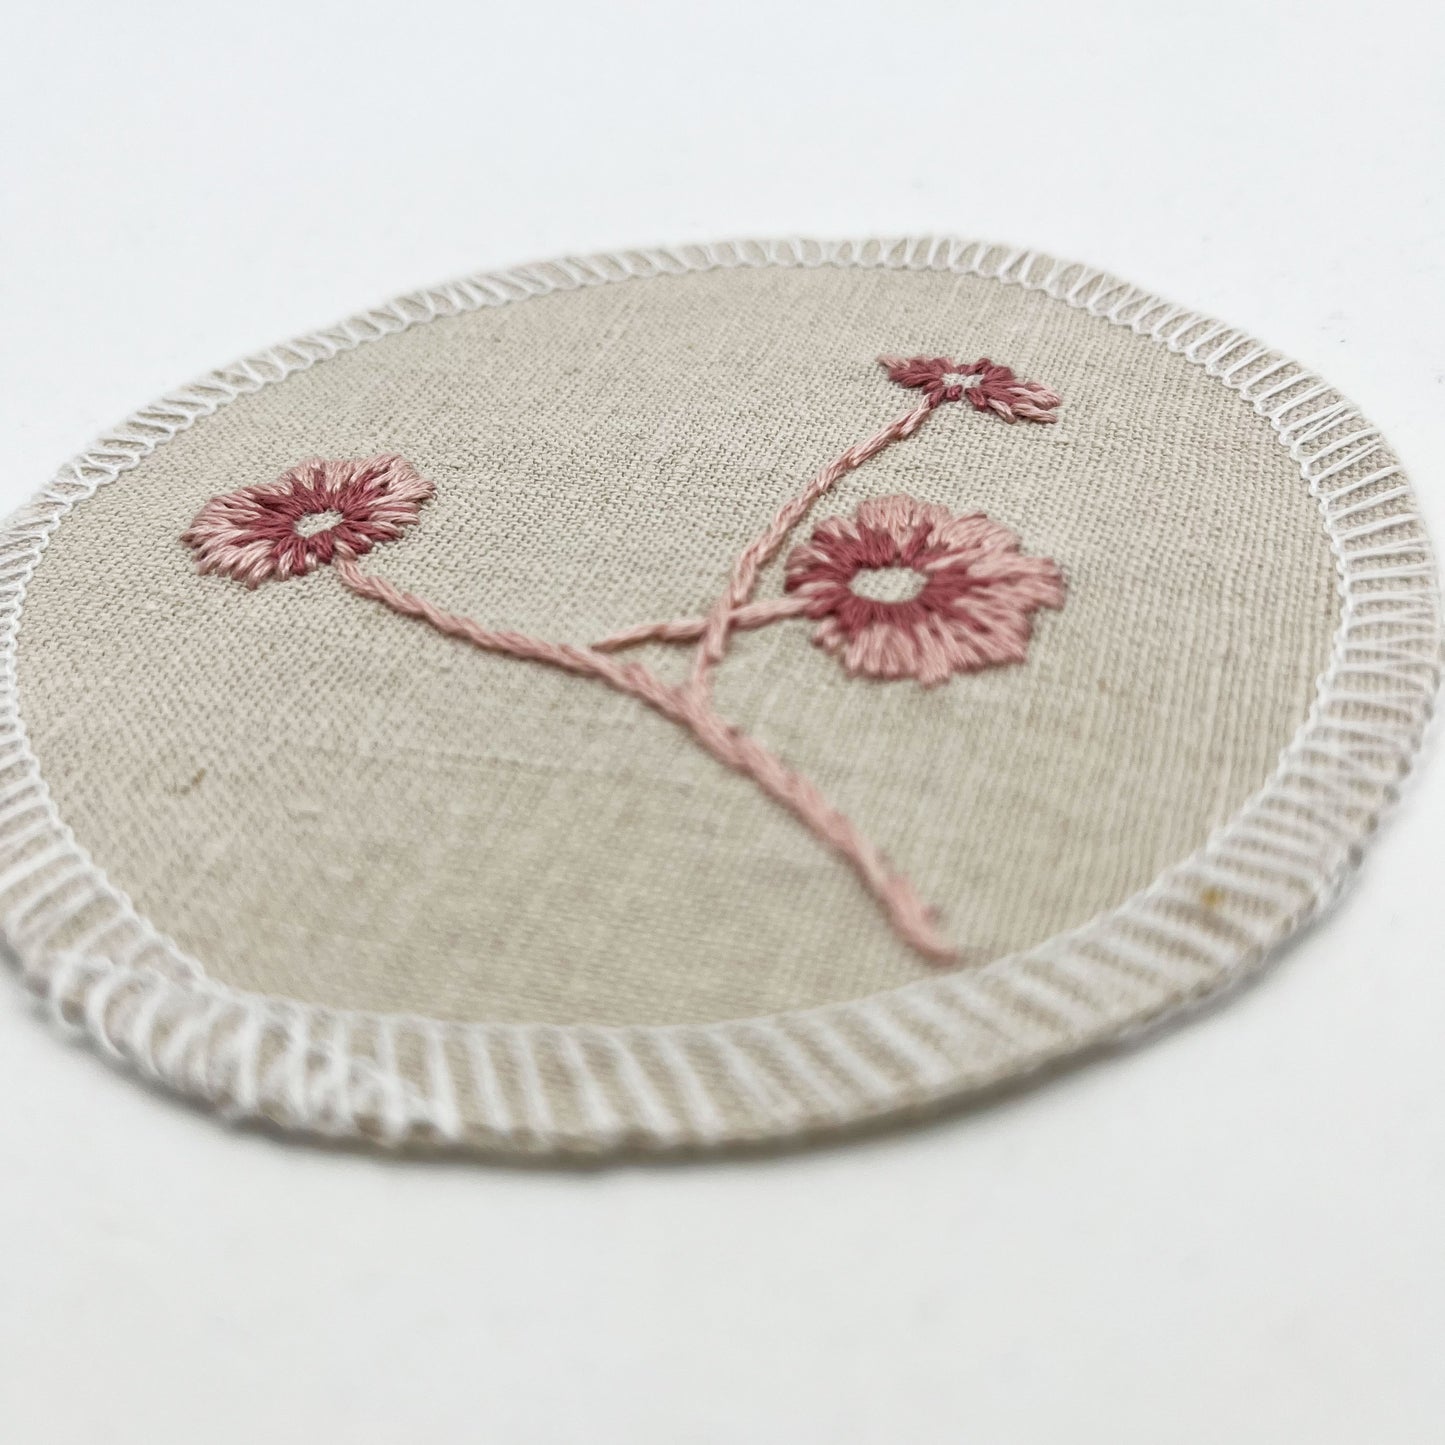 close up angled view of a circle shaped patch, made from a natural color linen fabric, hand embroidered with 3 poppies in shades of pink, edges overlocked with white thread, on a white background